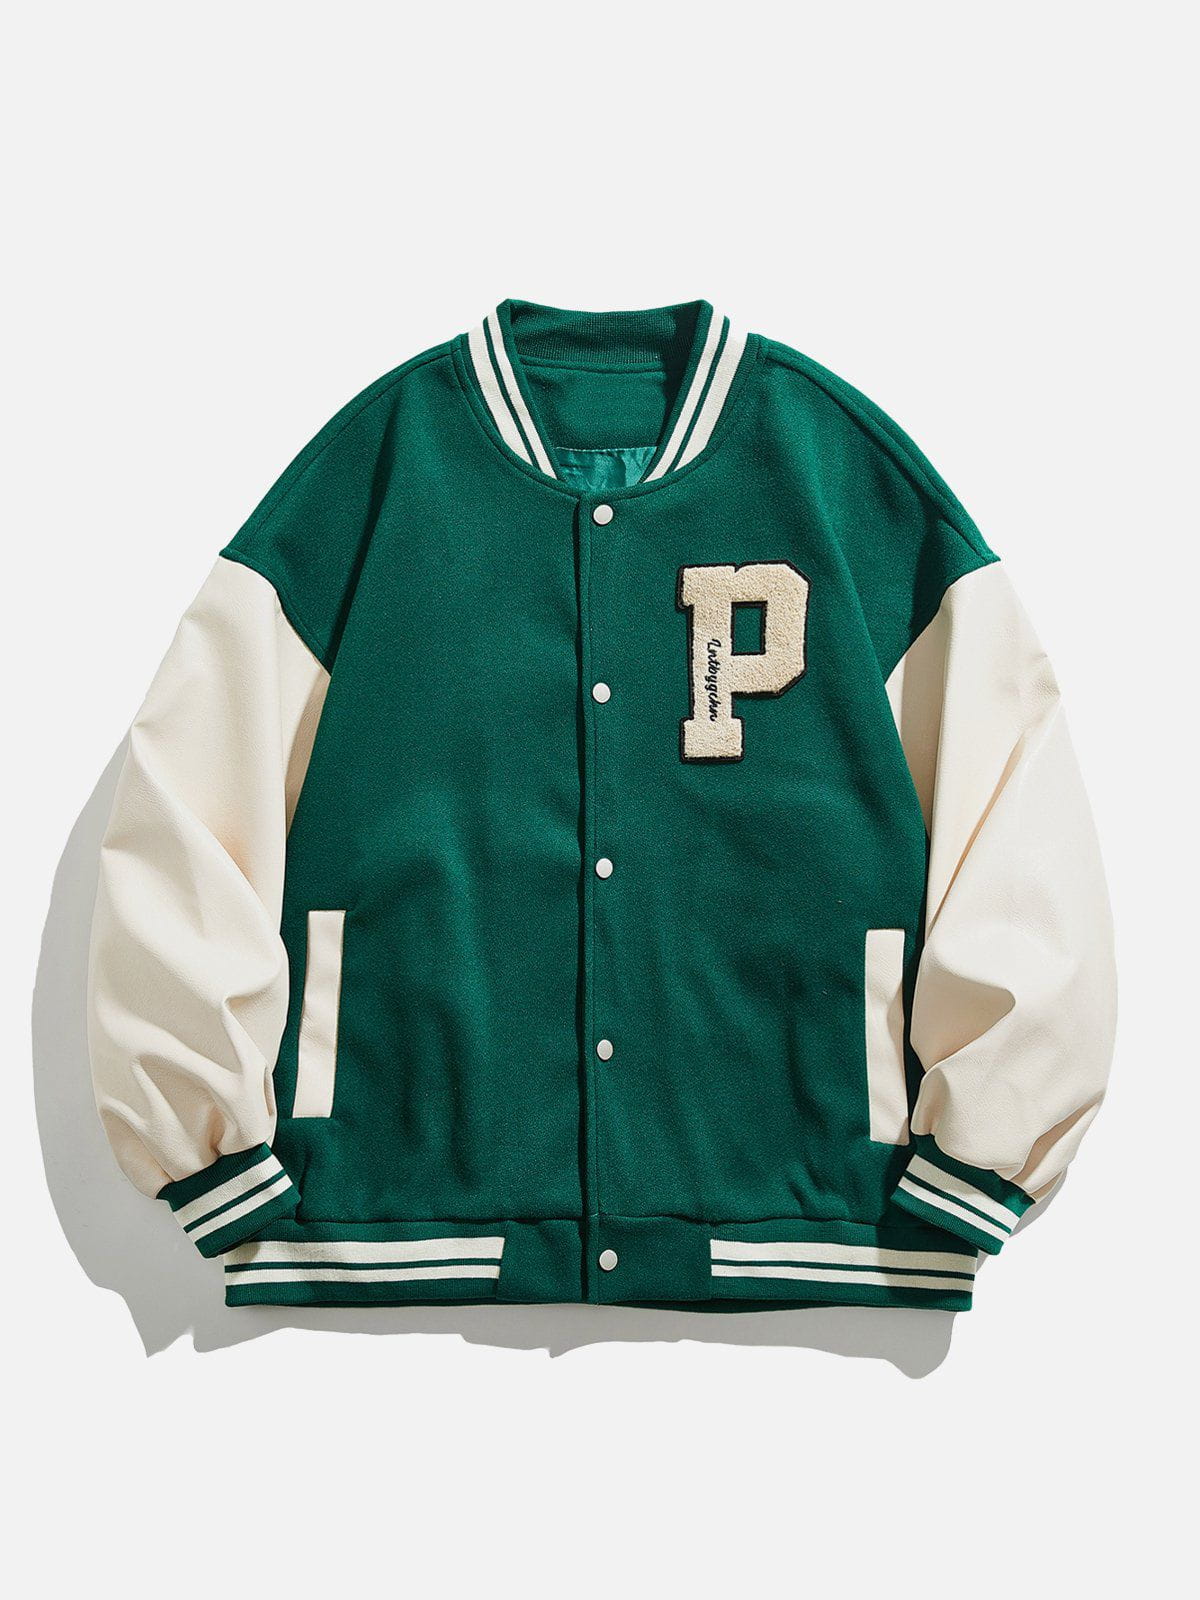 LUXENFY™ - Embroidery Letters Varsity Jacket - 112 luxenfy.com